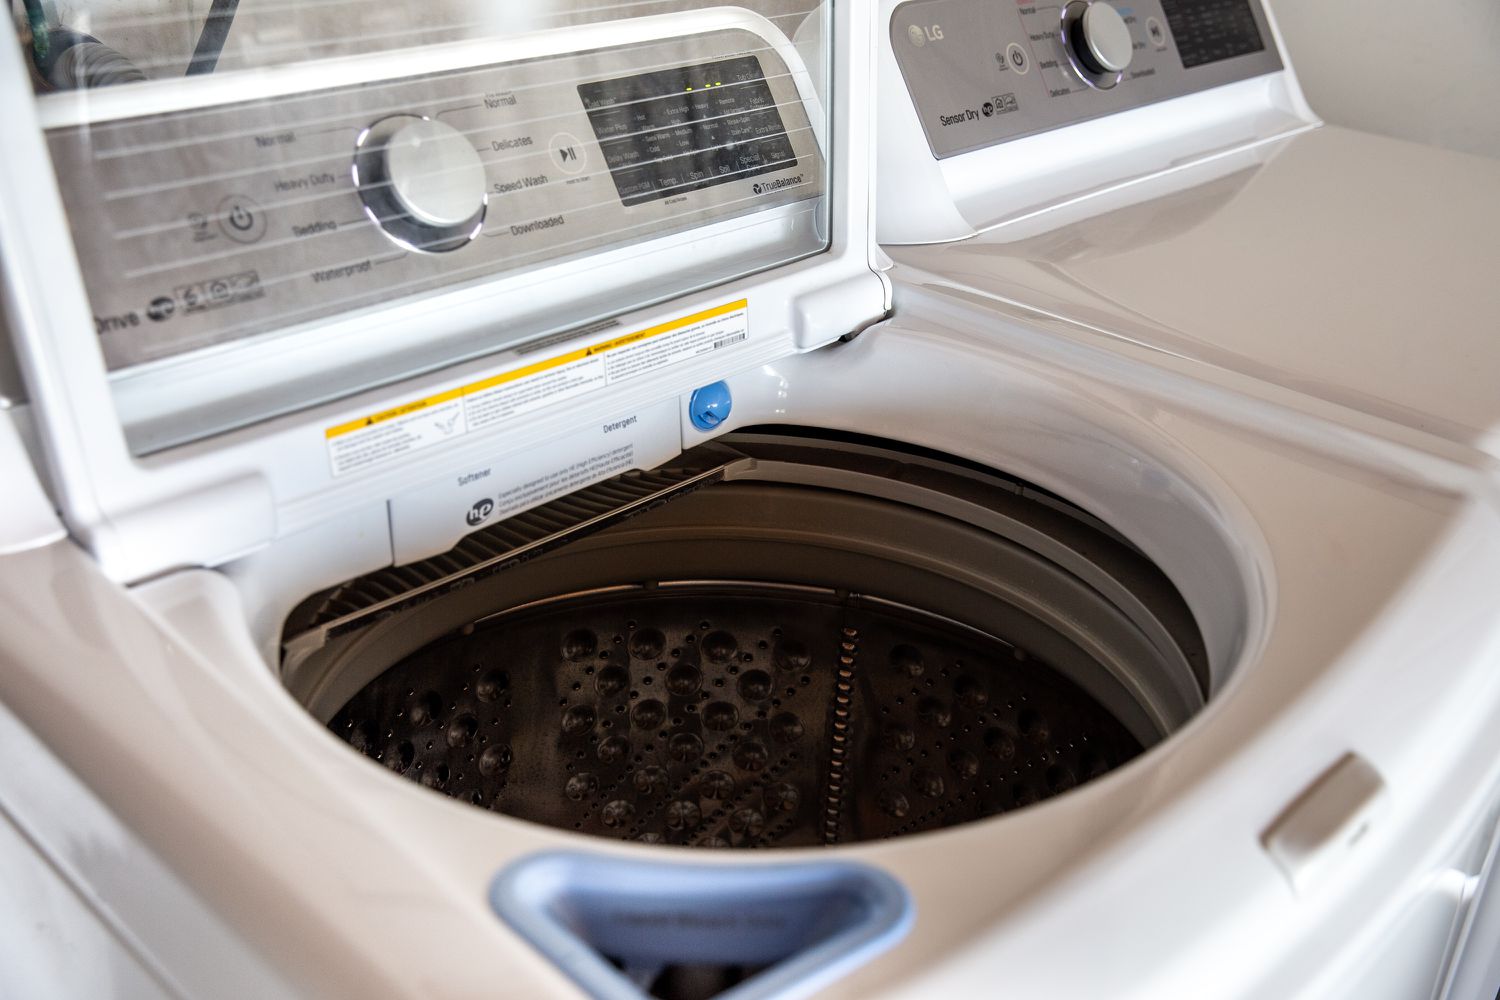 How To Fix The Error Code F6 For LG Washing Machine